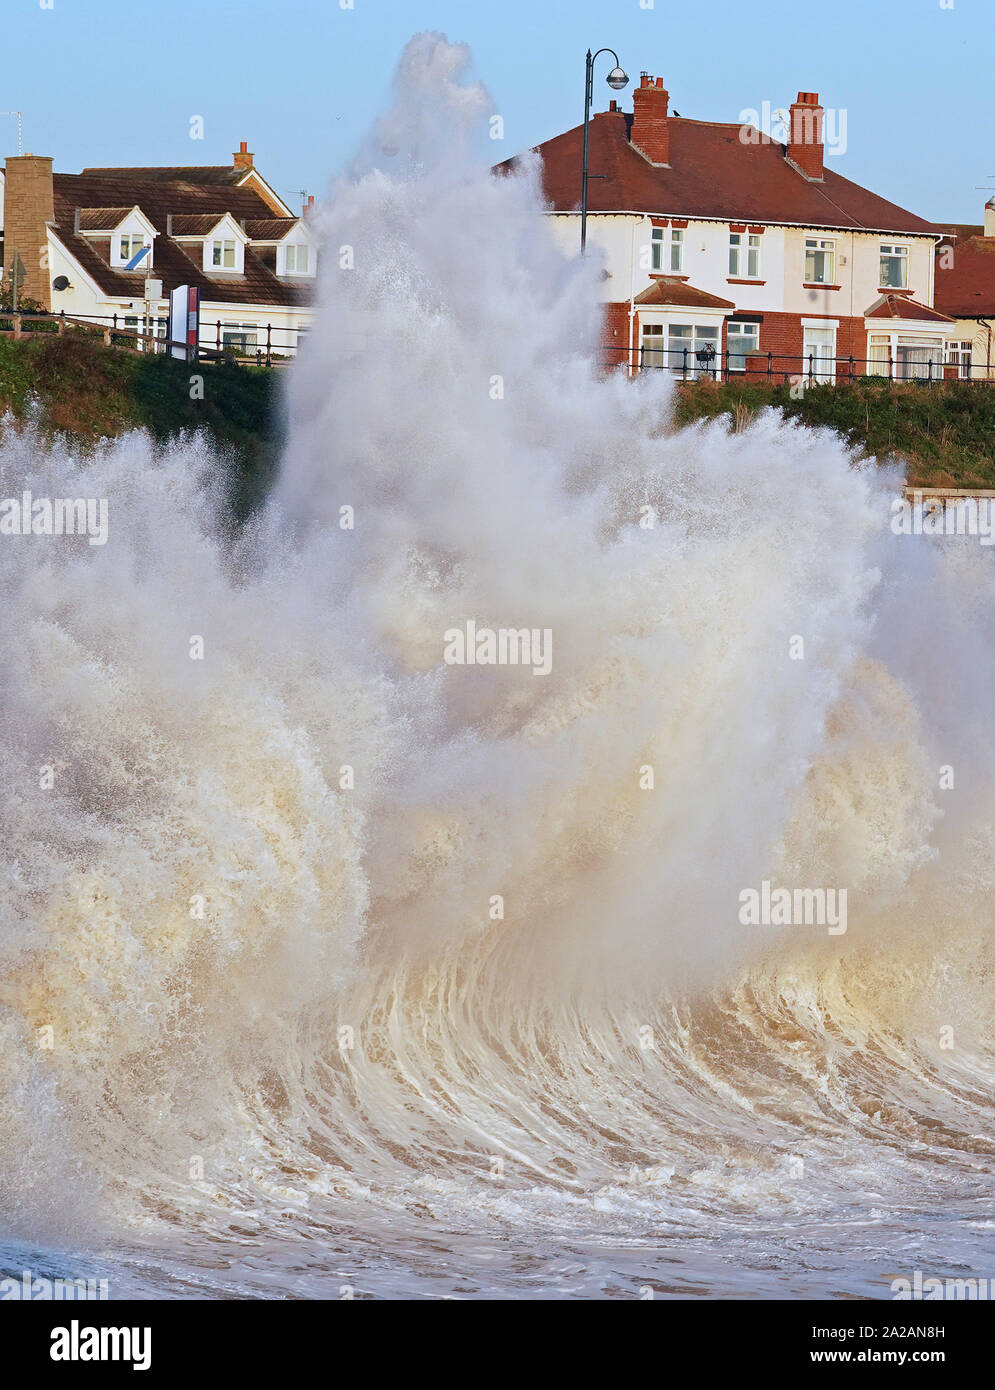 Waves crash against the sea wall at Seaham in County Durham. Elsewhere, a clean-up operation is under way after heavy downpours caused flash flooding across the UK, with some areas hit by a week's rain in just an hour. Stock Photo